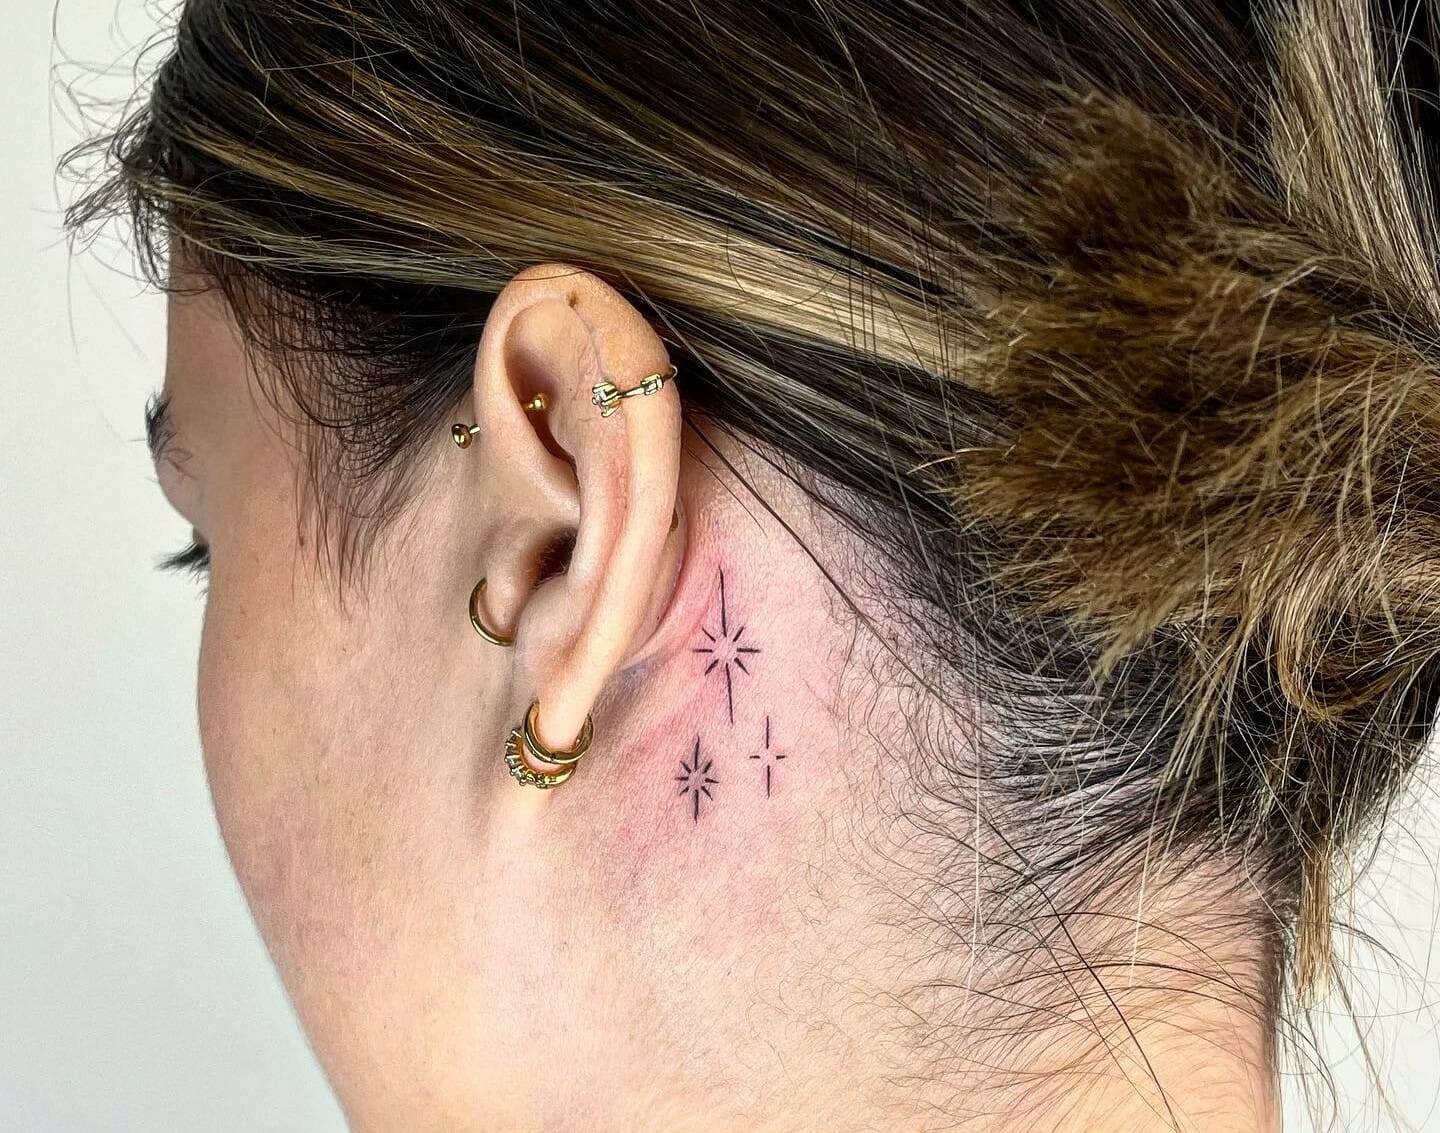 cover up behind ear tattooTikTok Search